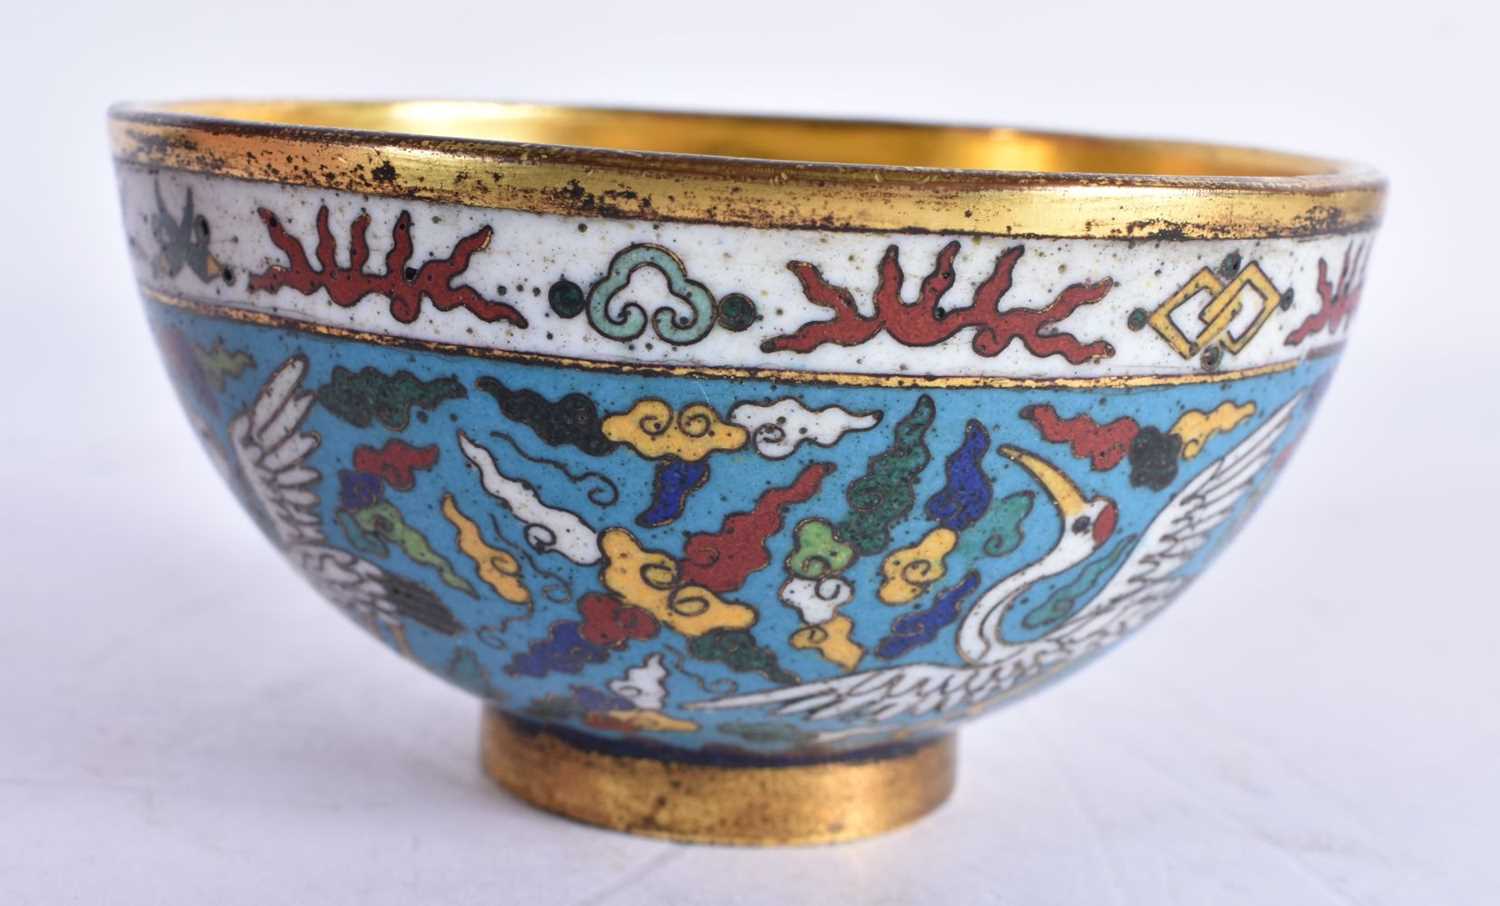 A FINE PAIR OF CLOISONNE ENAMEL BRONZE BOWLS Jiajing mark and probably of the period, decorated on a - Image 4 of 16